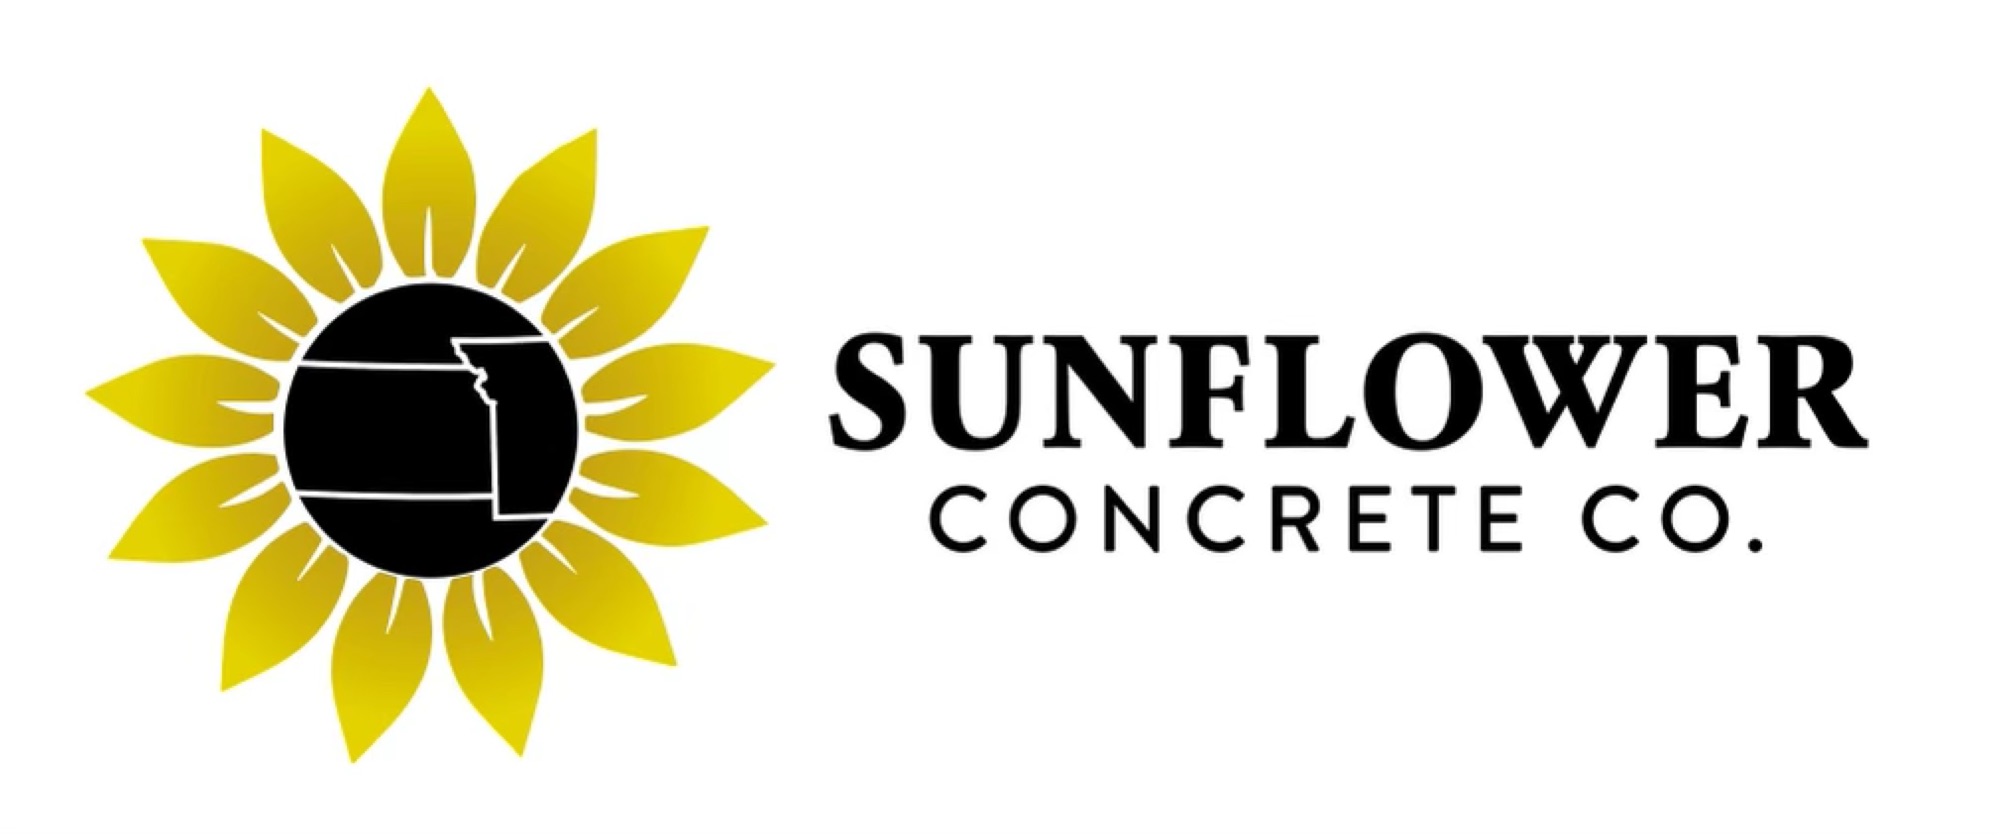 Sunflower Construction and Remodeling, Inc. Logo